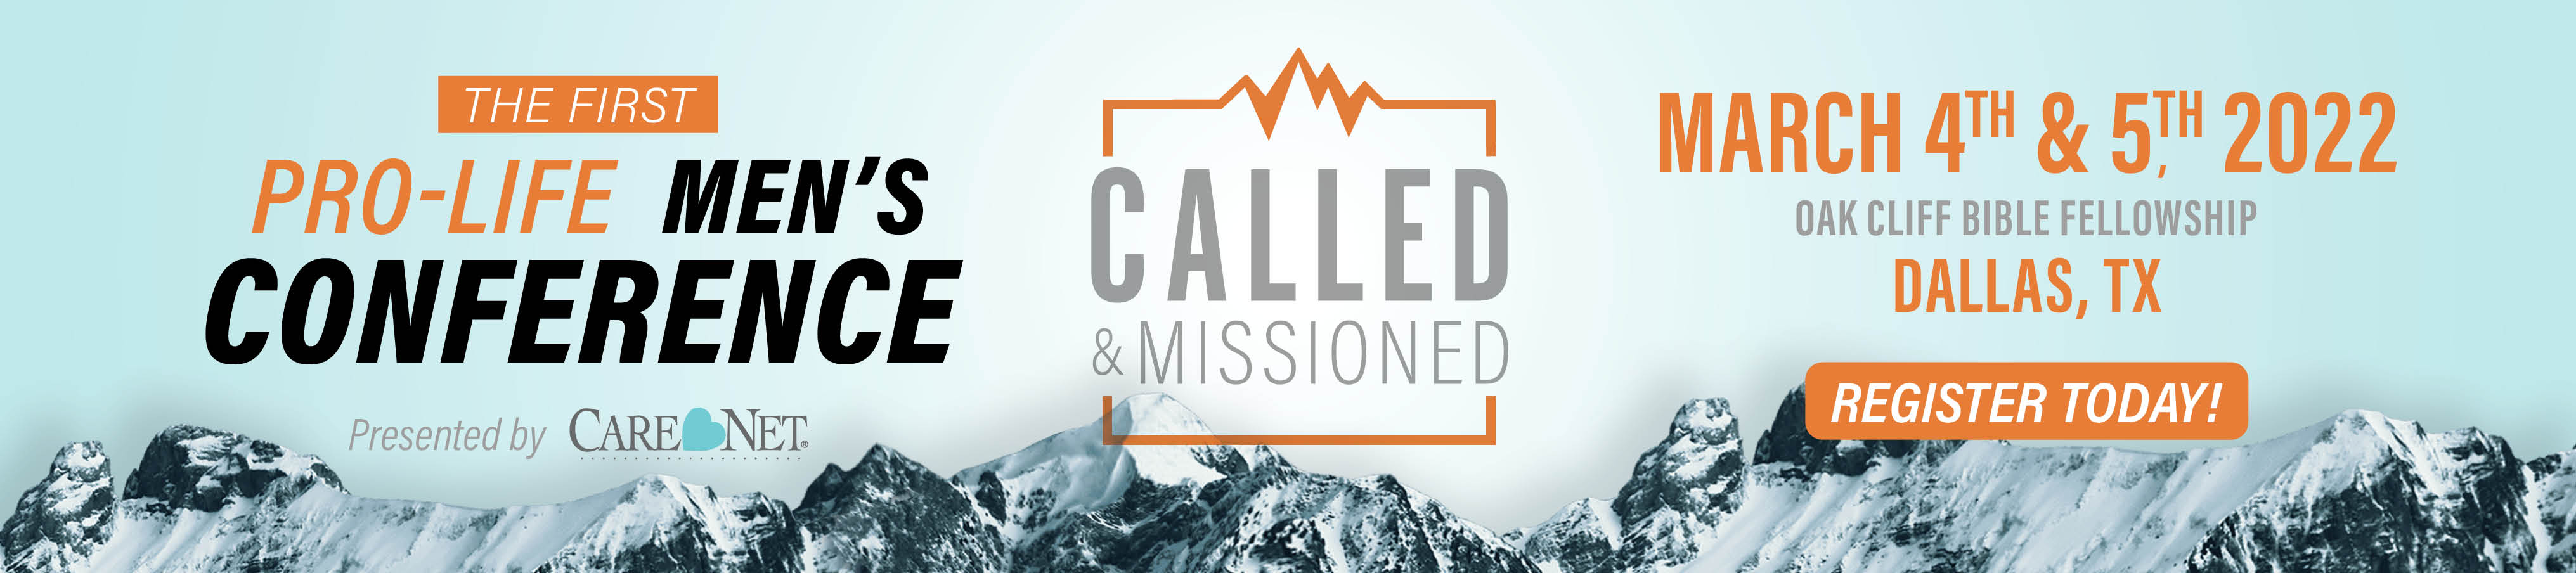 Called and Missioned_Website_Banner_1950x435